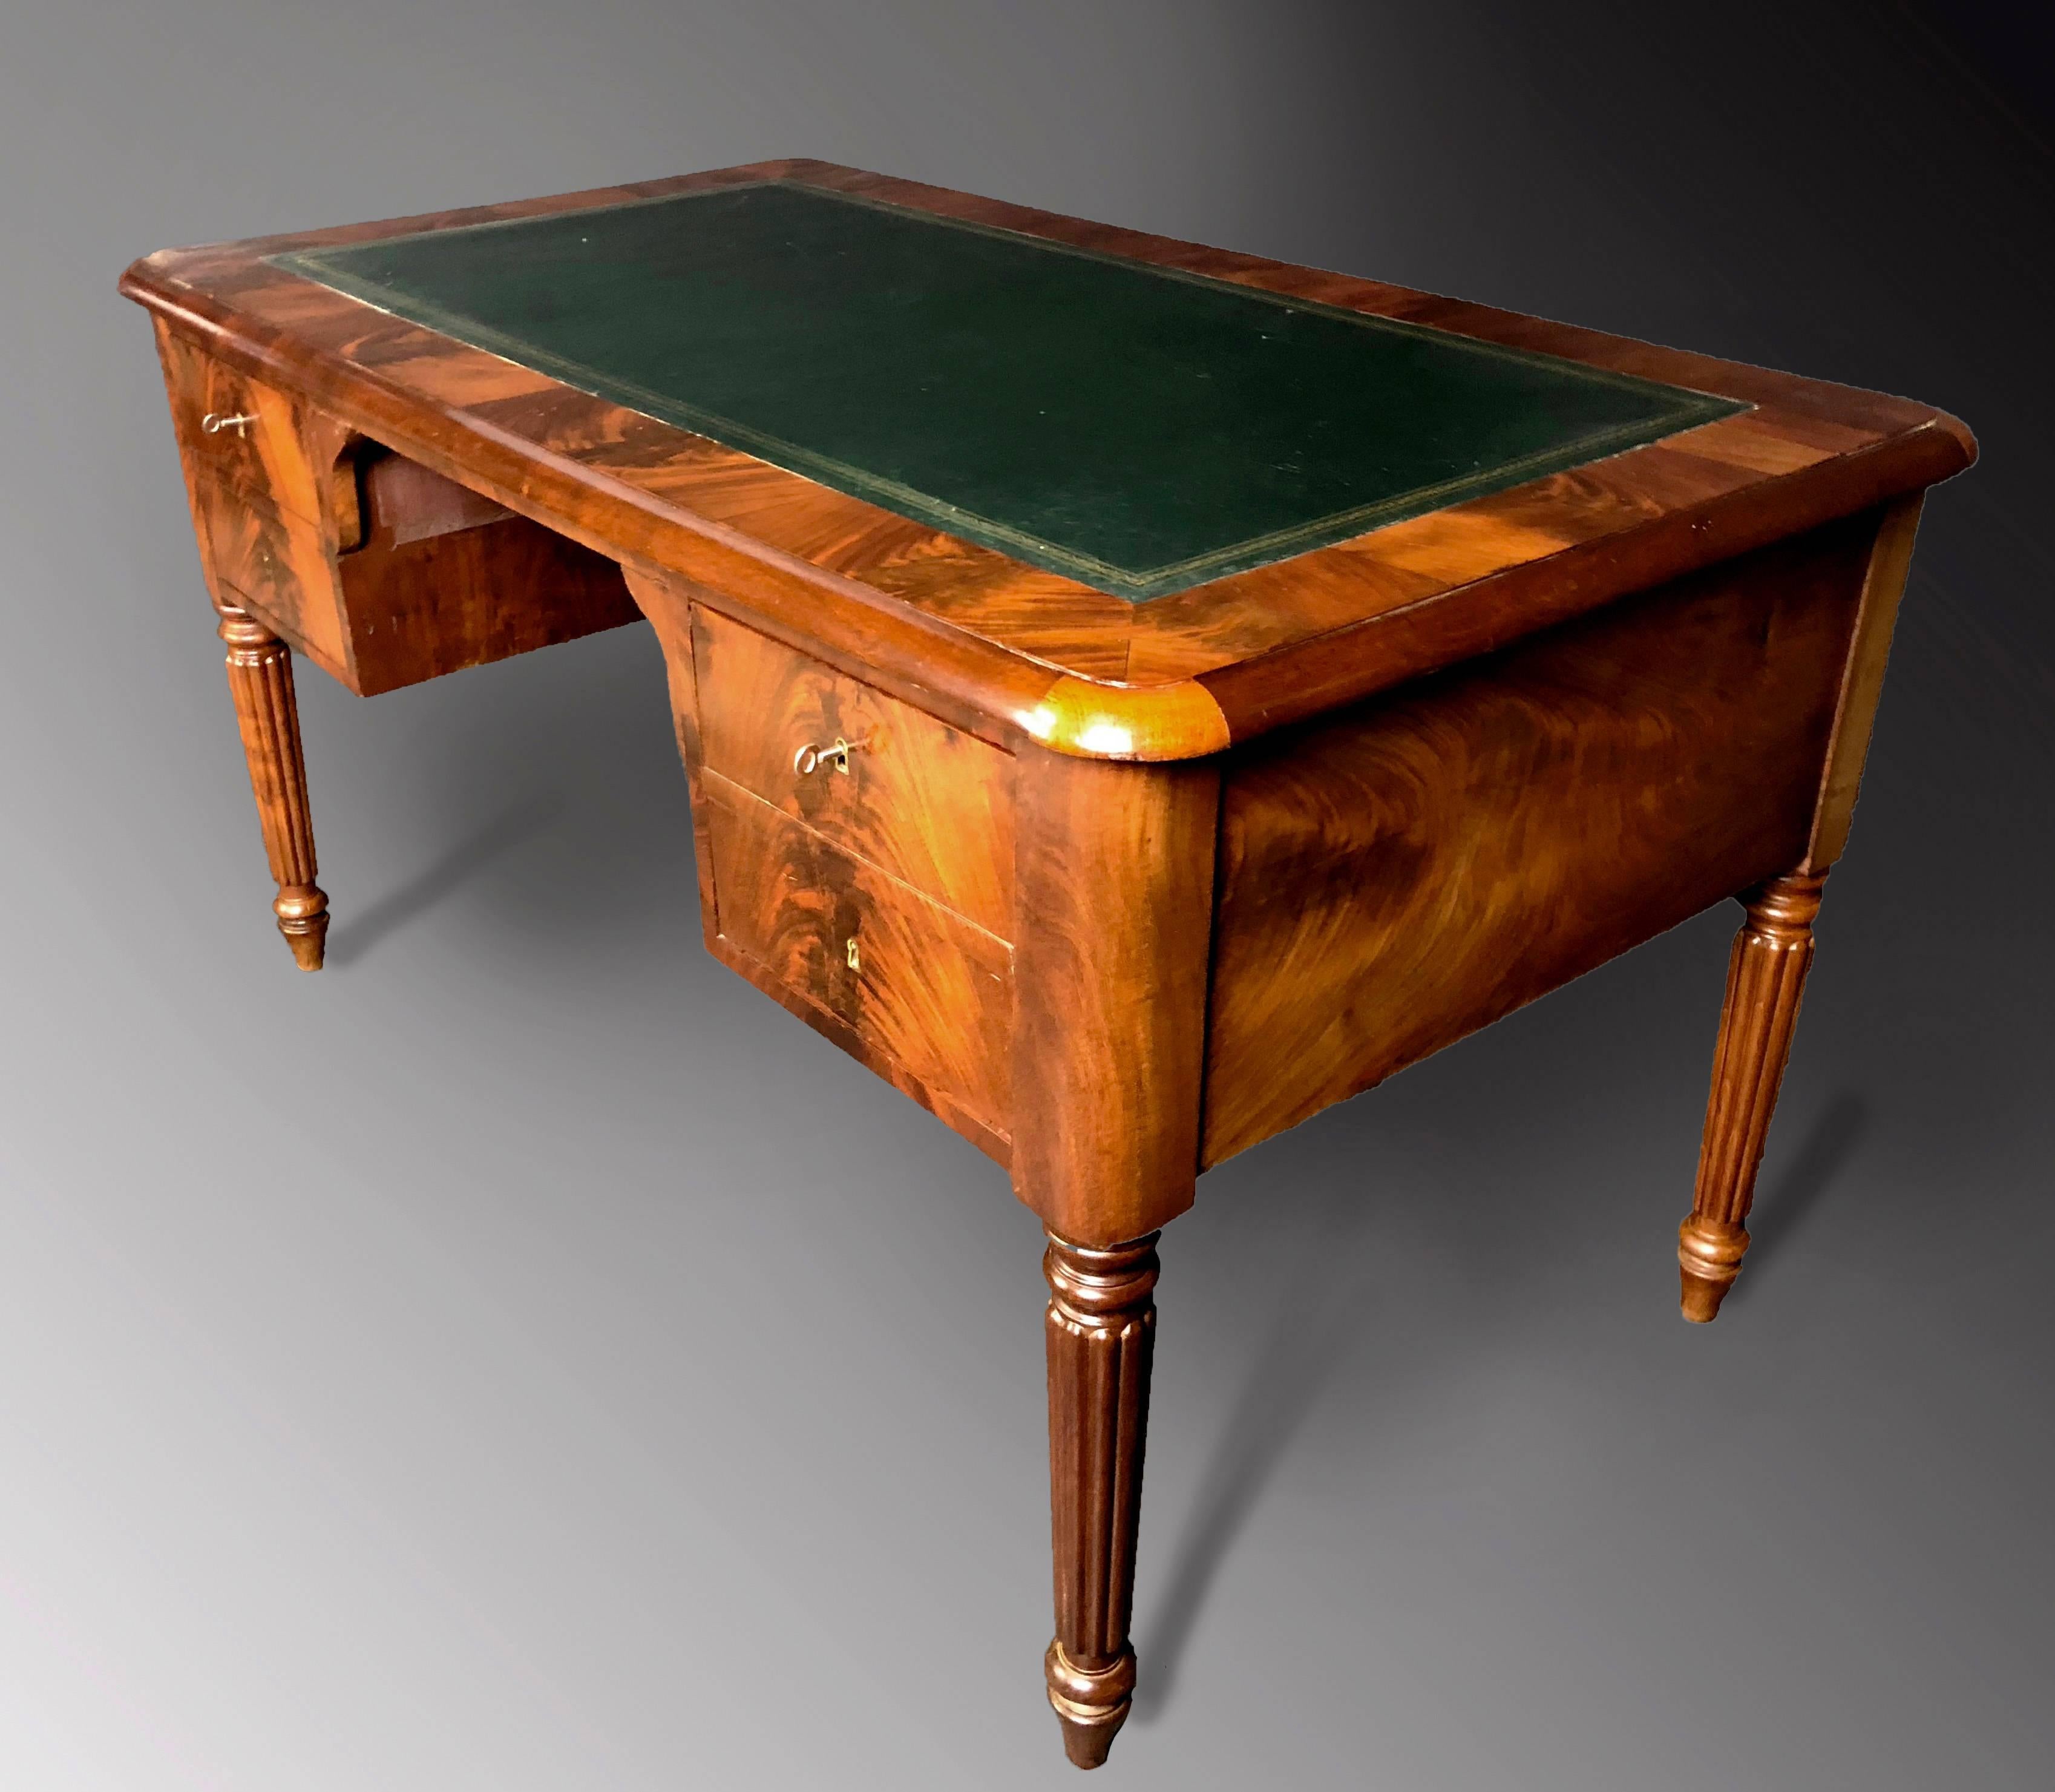 Fine antique writing desk dating to the middle of the 19th century, of the period and style Louis Philippe of France, of outstandingly figured mahogany veneers and with gold tooled green leather writing surface. Four finely turned and profoundly